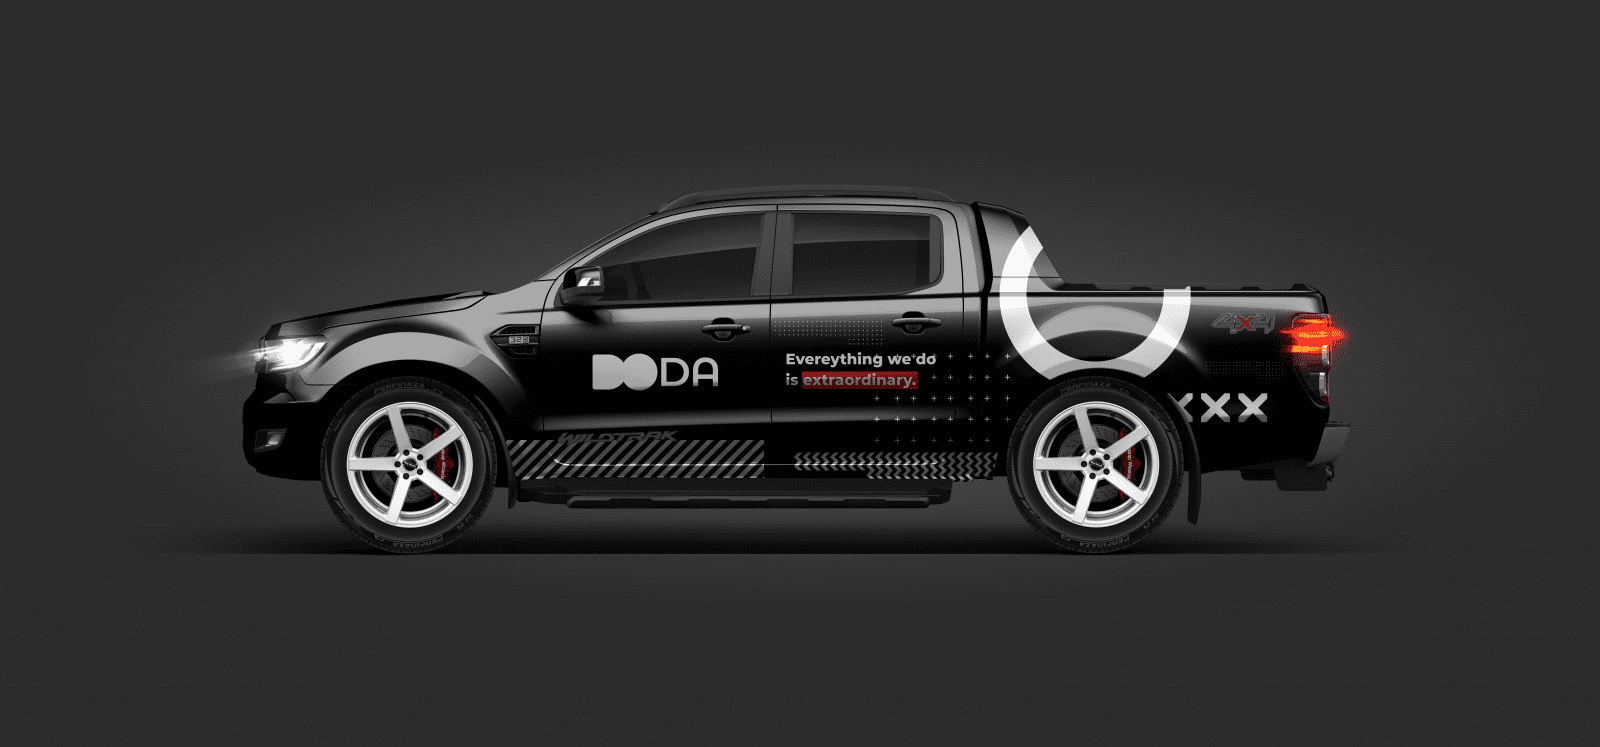 Vehicle branding. Do Digital Agency graphic design for vehicle wrap